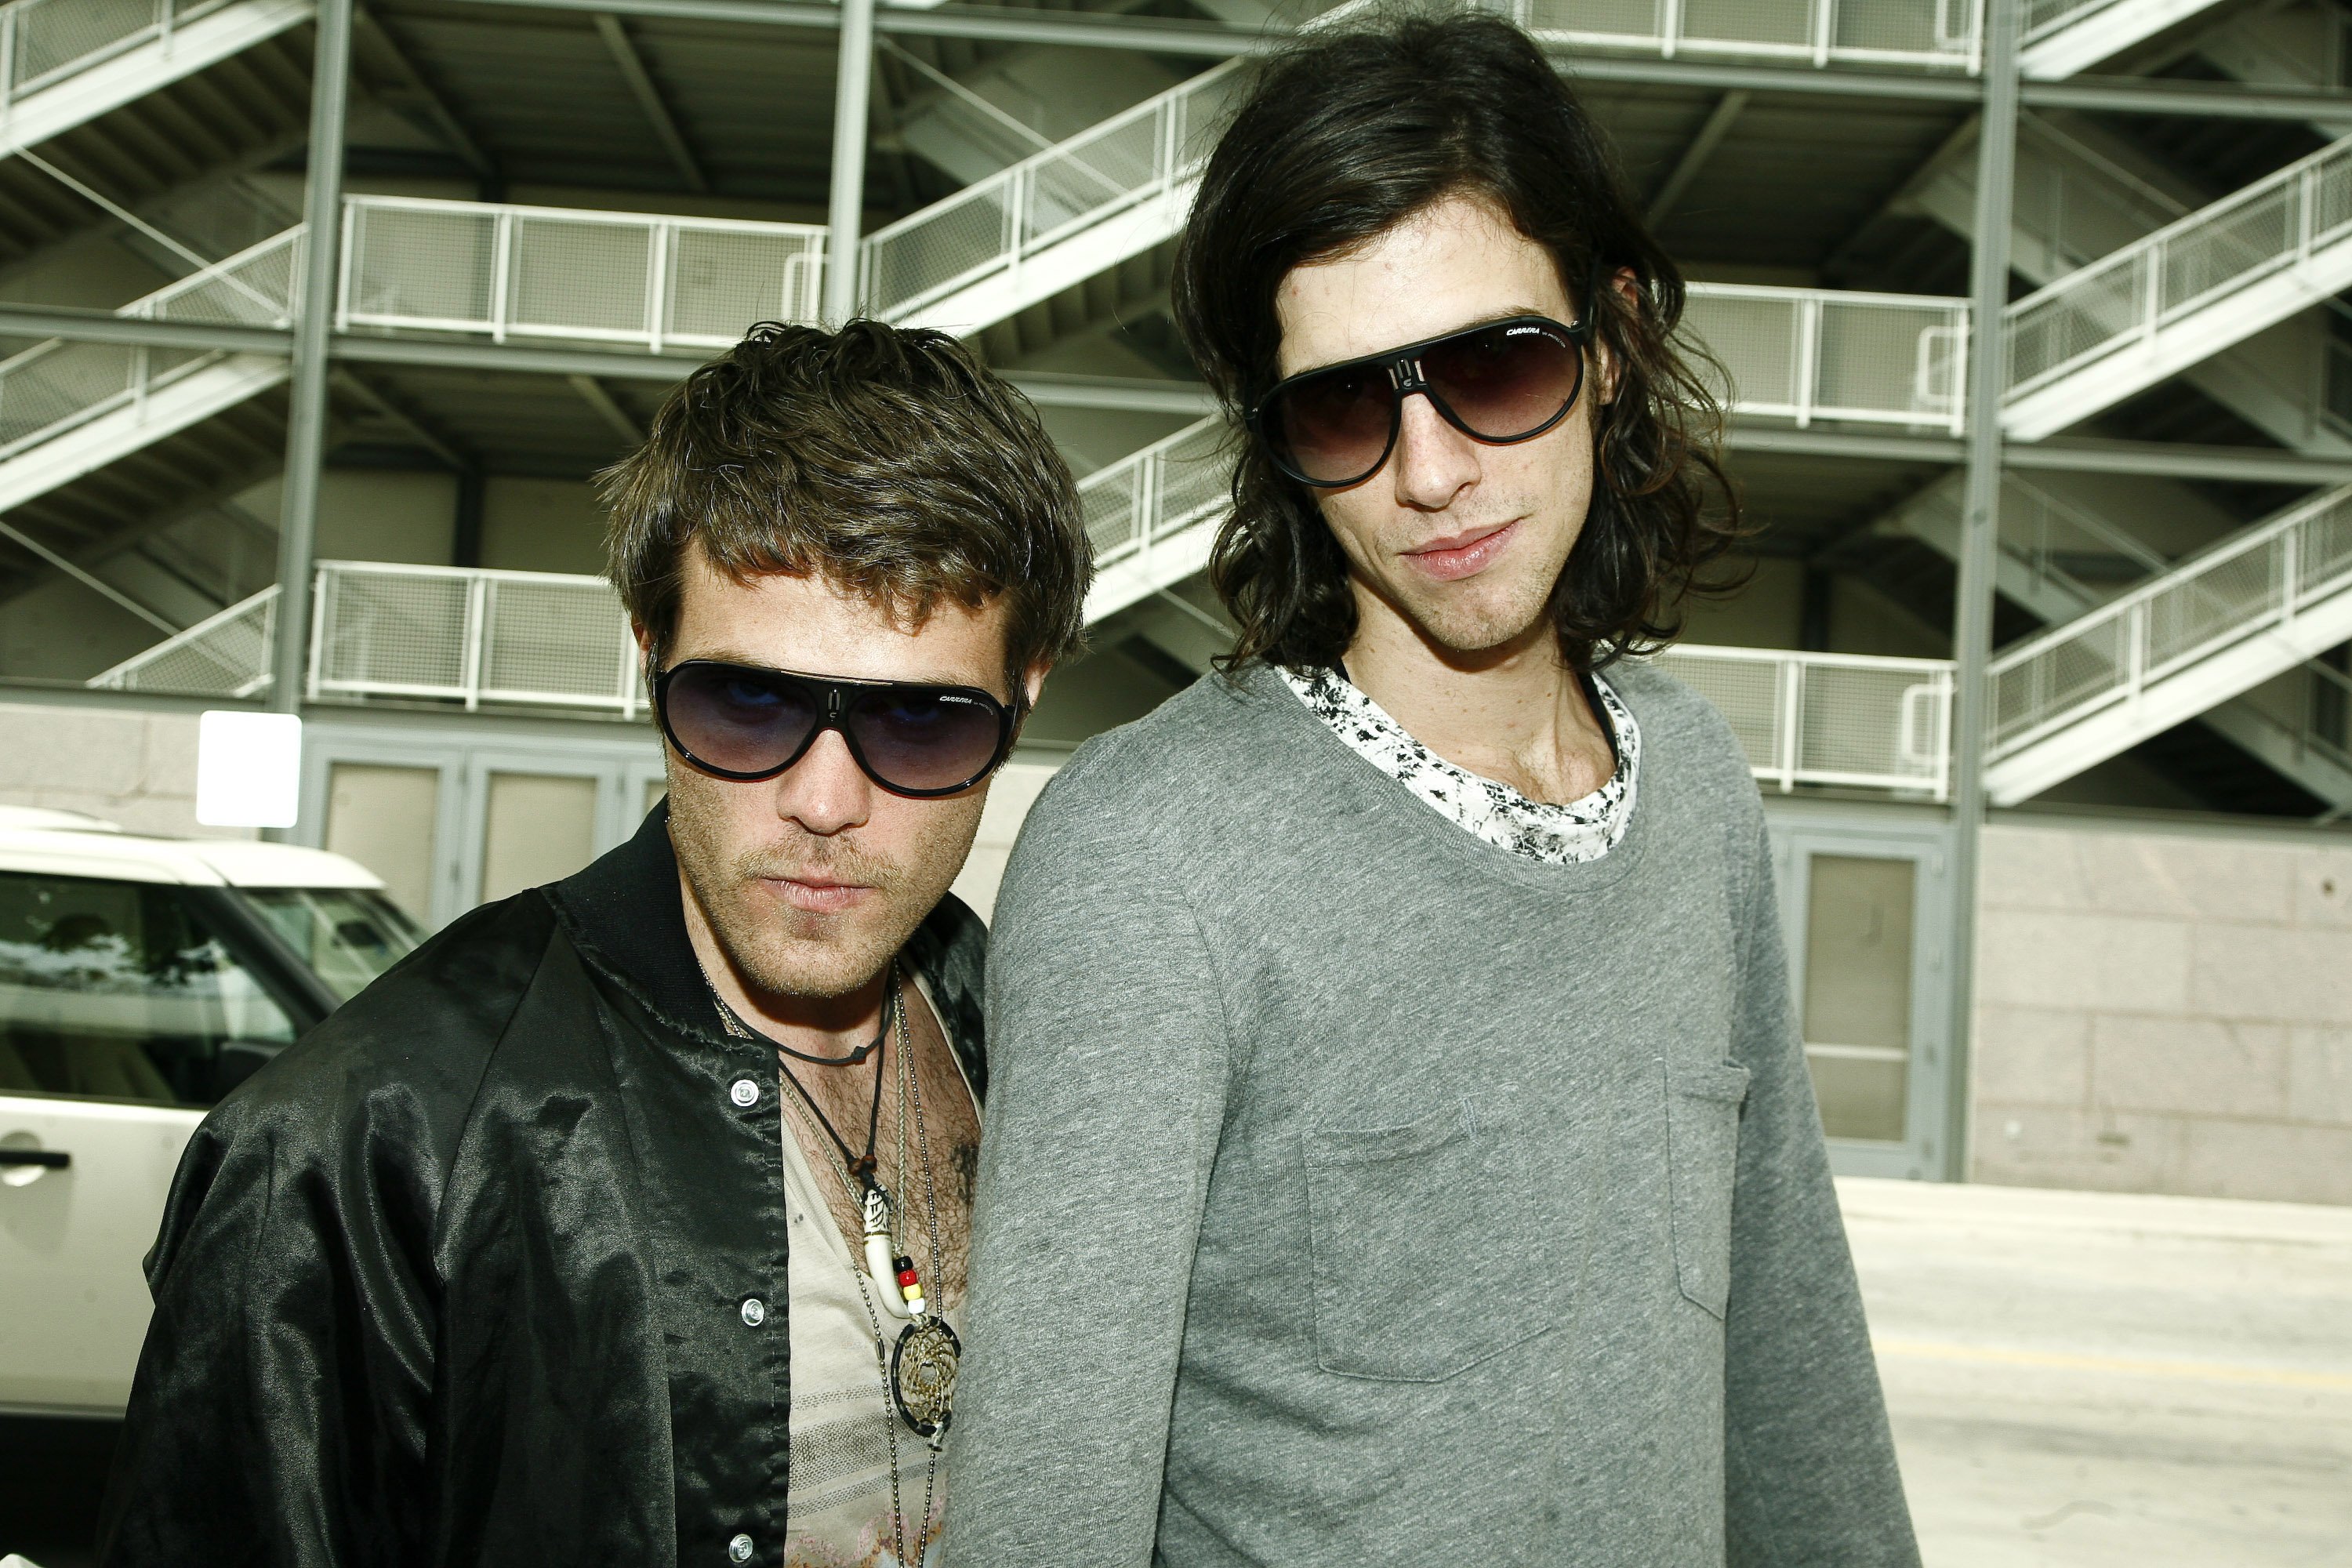 Sean Foreman and Nathaniel Motte of the band 3OH!3 wearing sunglasses